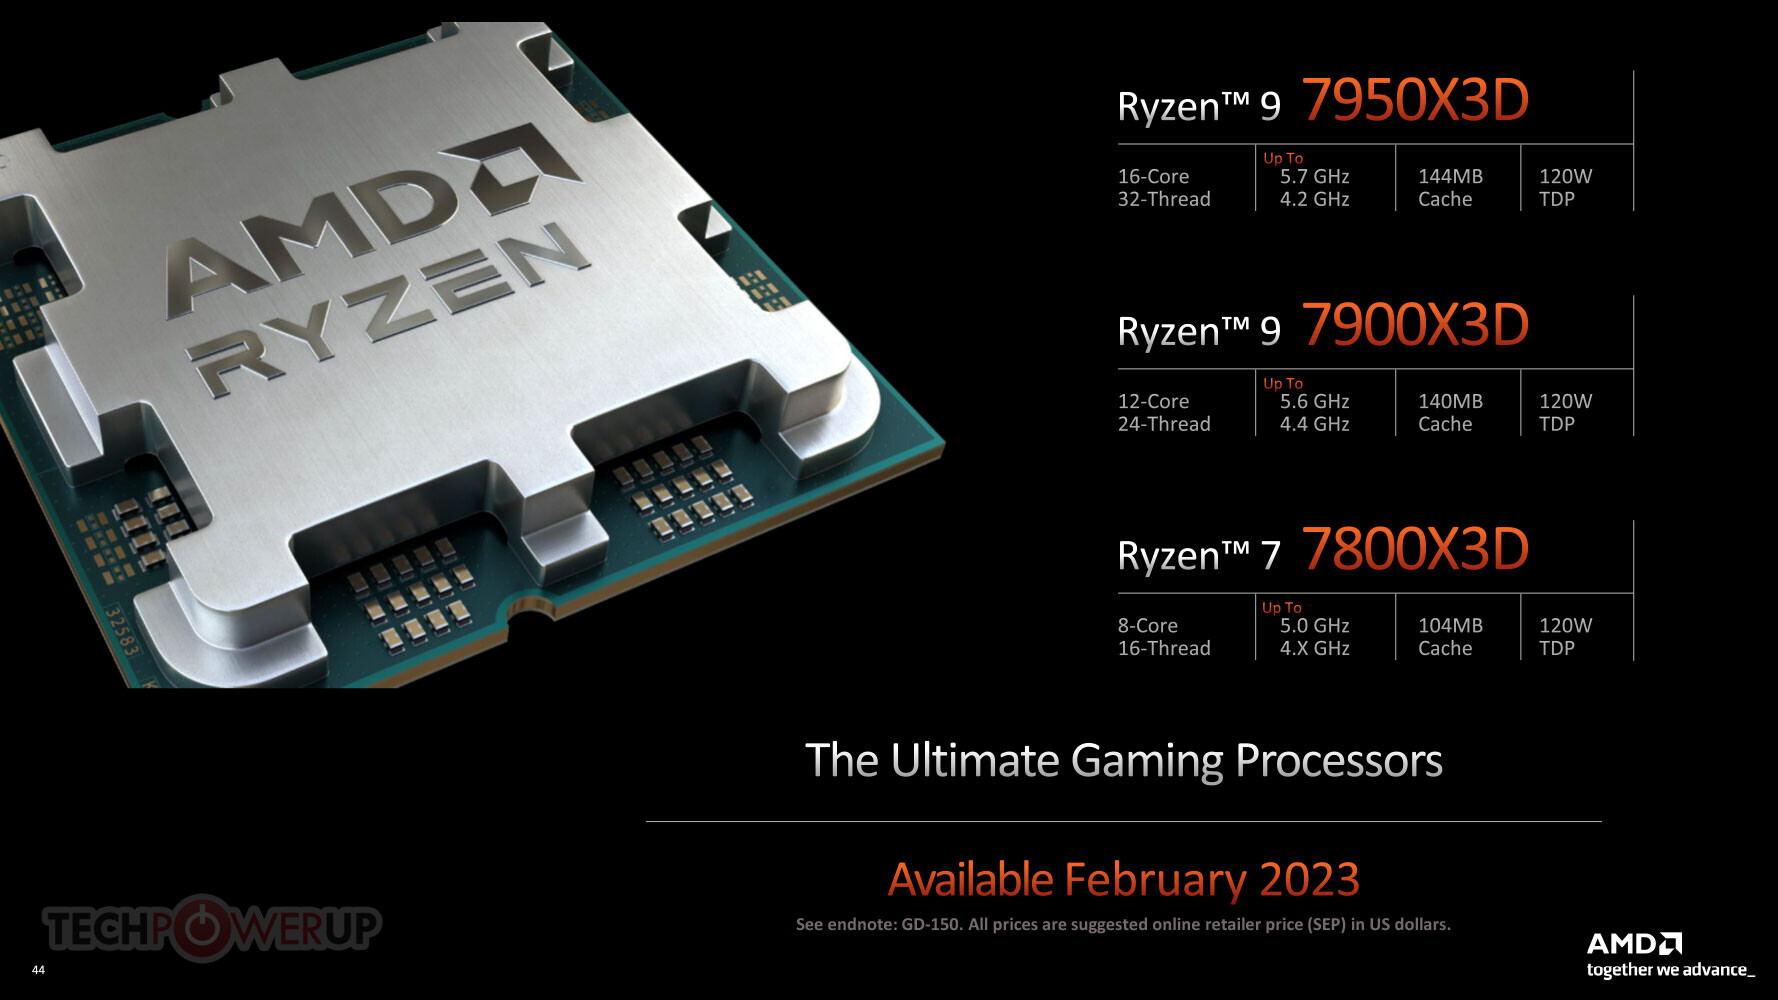 AMD Launches Ryzen 7000X3D CPUs to Dominate Raptor Lake - returnal